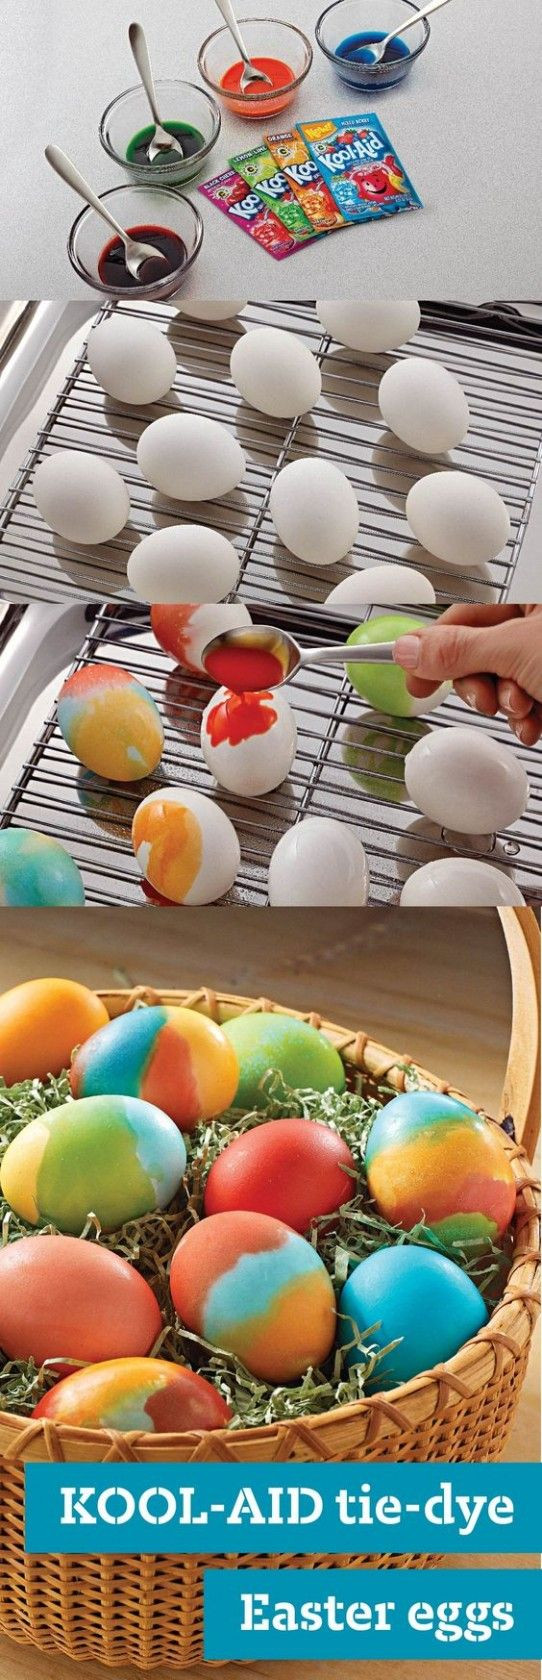 Easter Egg Dying Party Ideas
 KOOL AID Tie Dye Easter Eggs Recipe